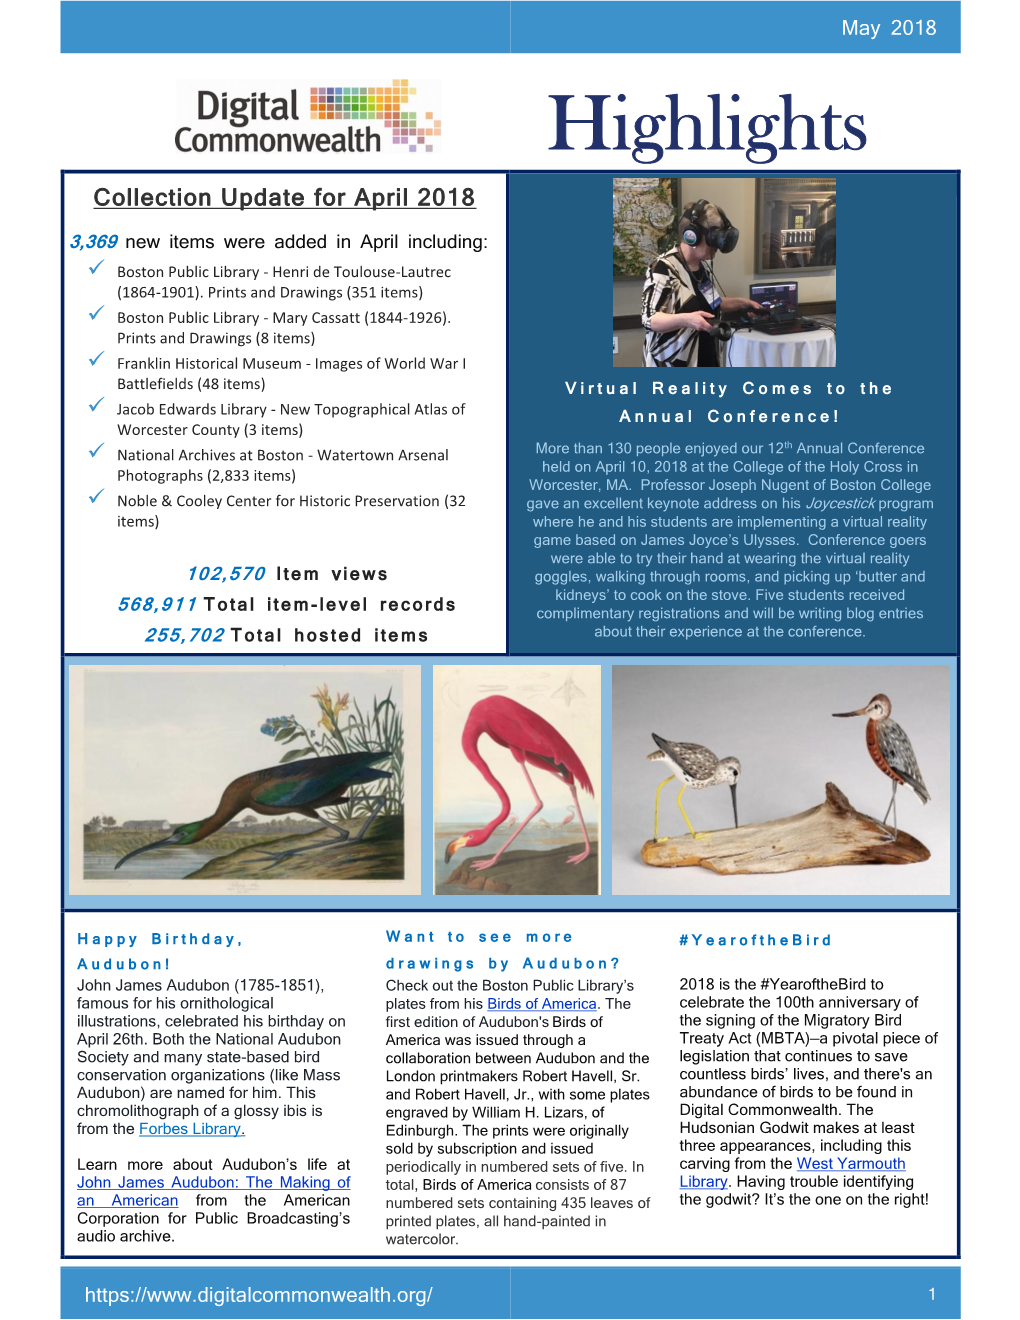 May 2018 Newsletter